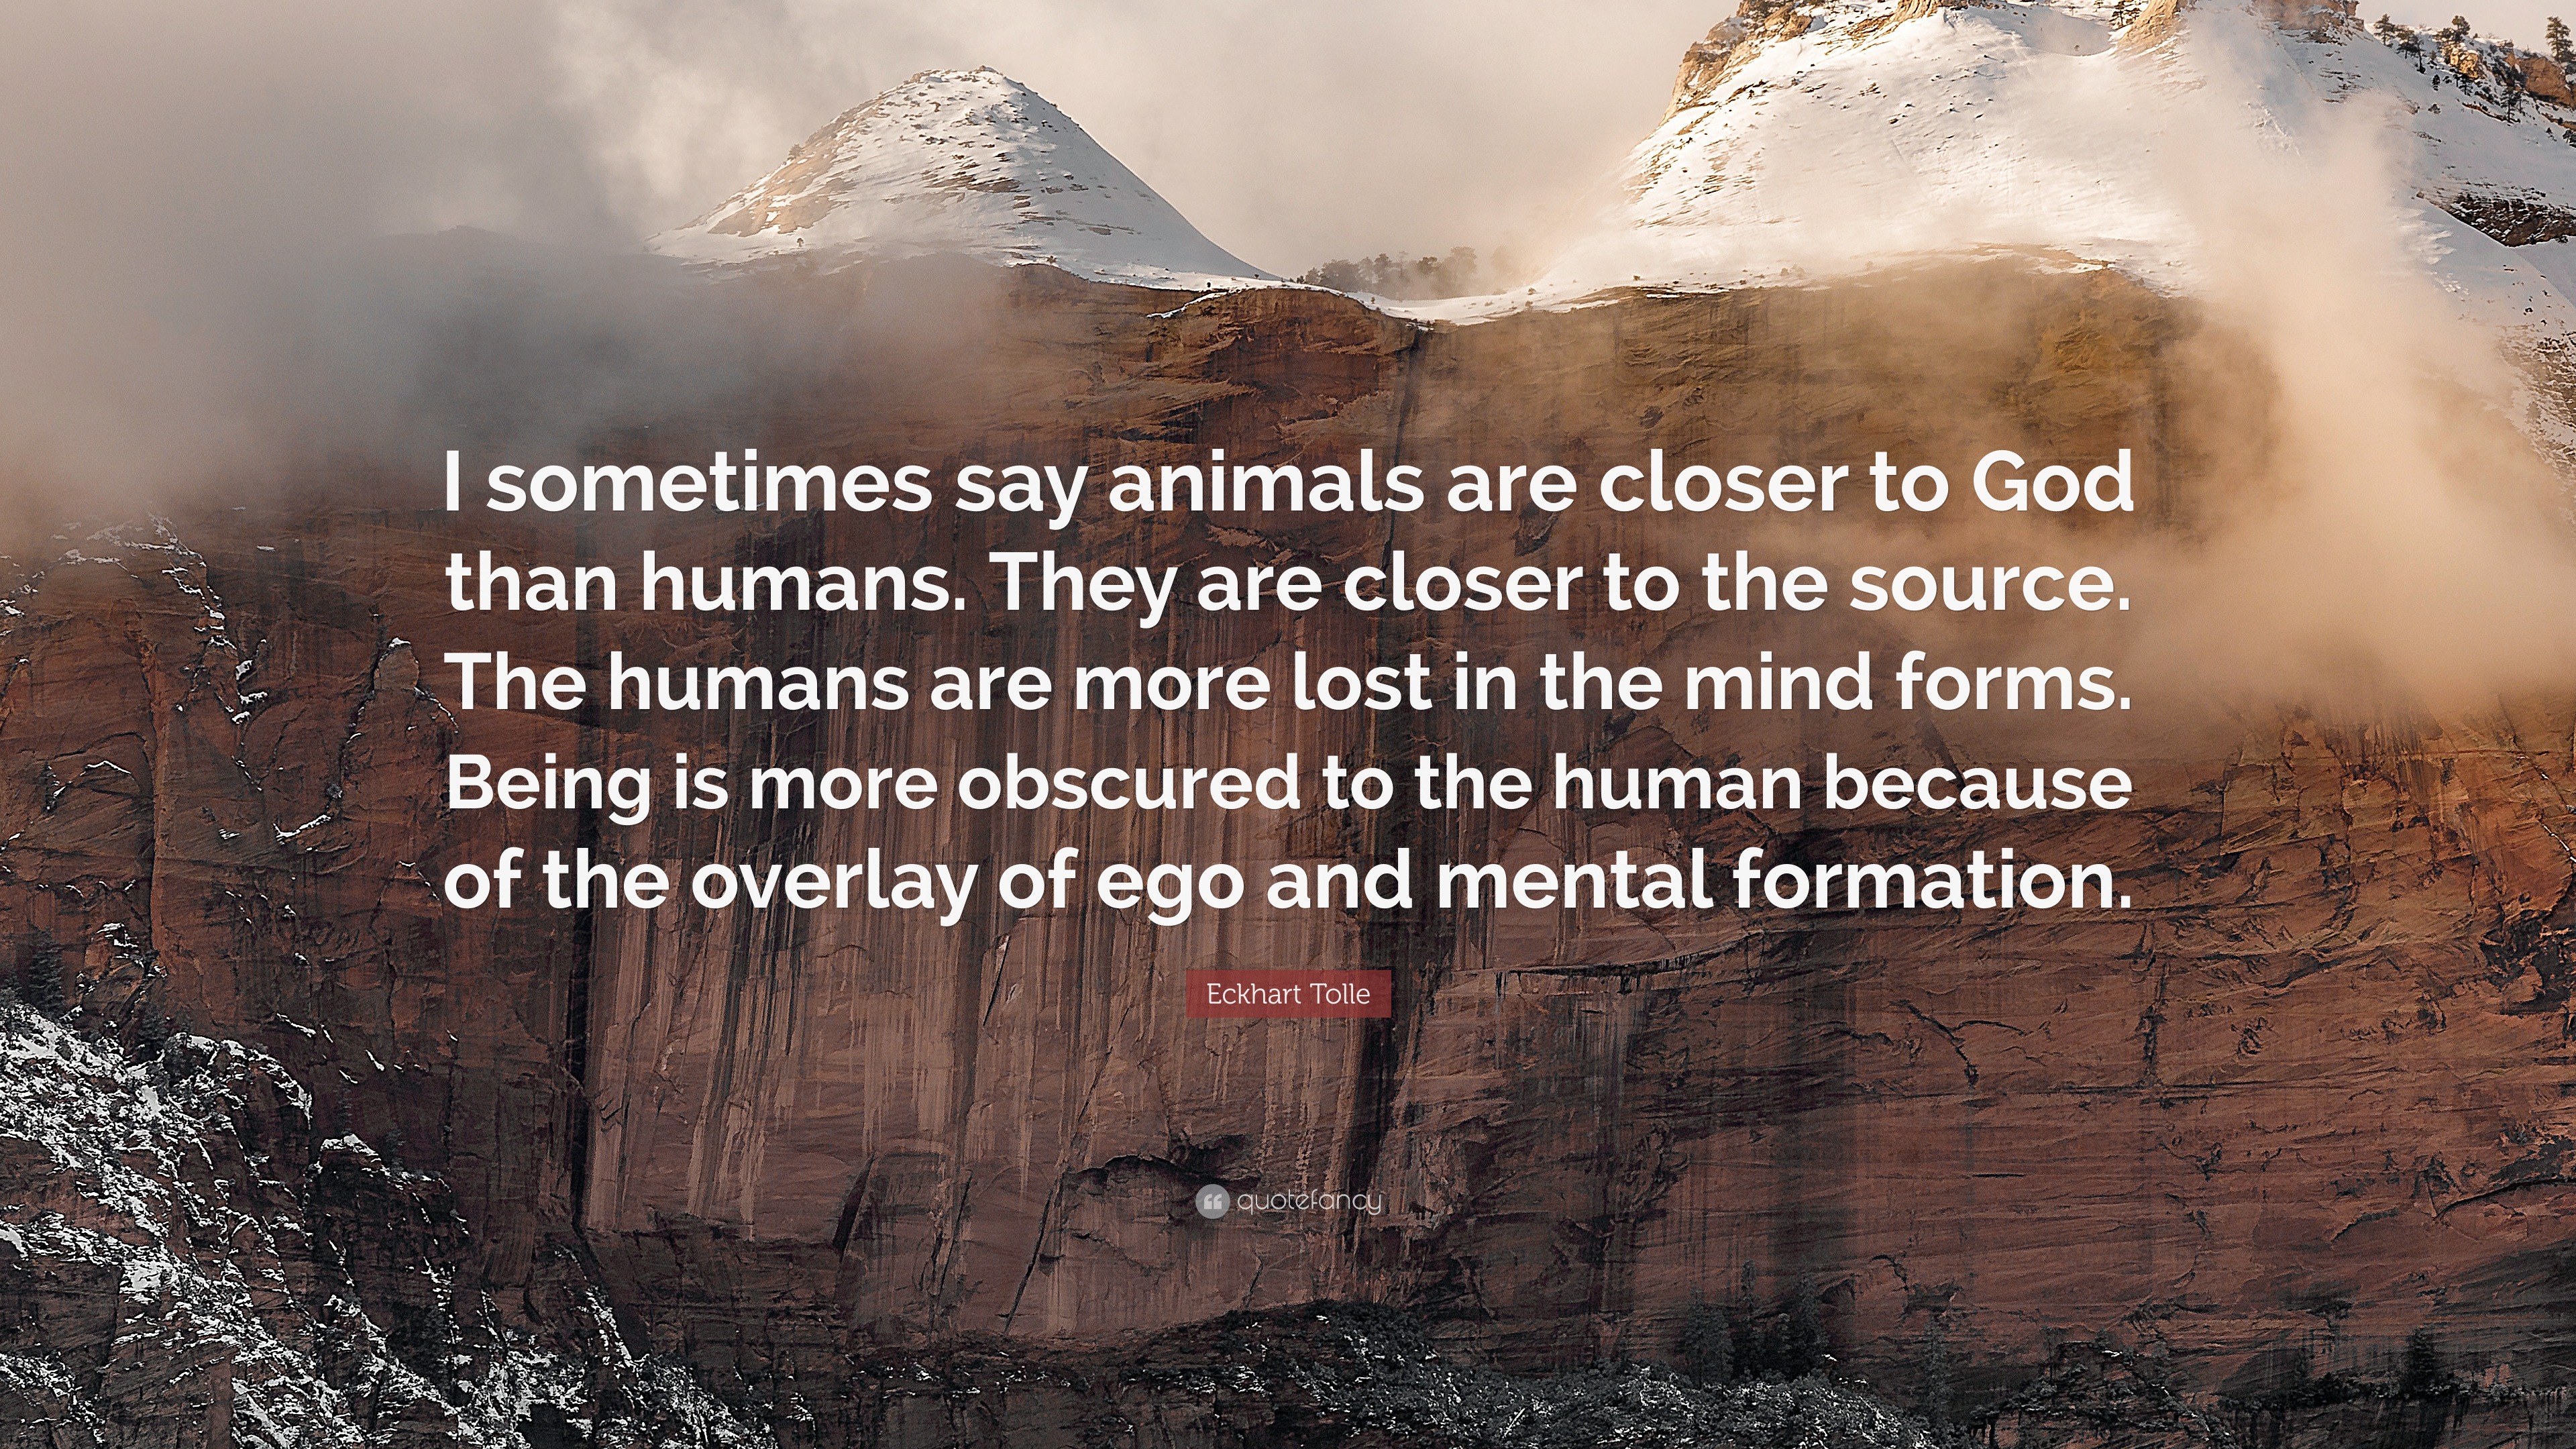 Eckhart Tolle Quote: “I sometimes say animals are closer to God than  humans. They are closer to the source. The humans are more lost in the  mi...”